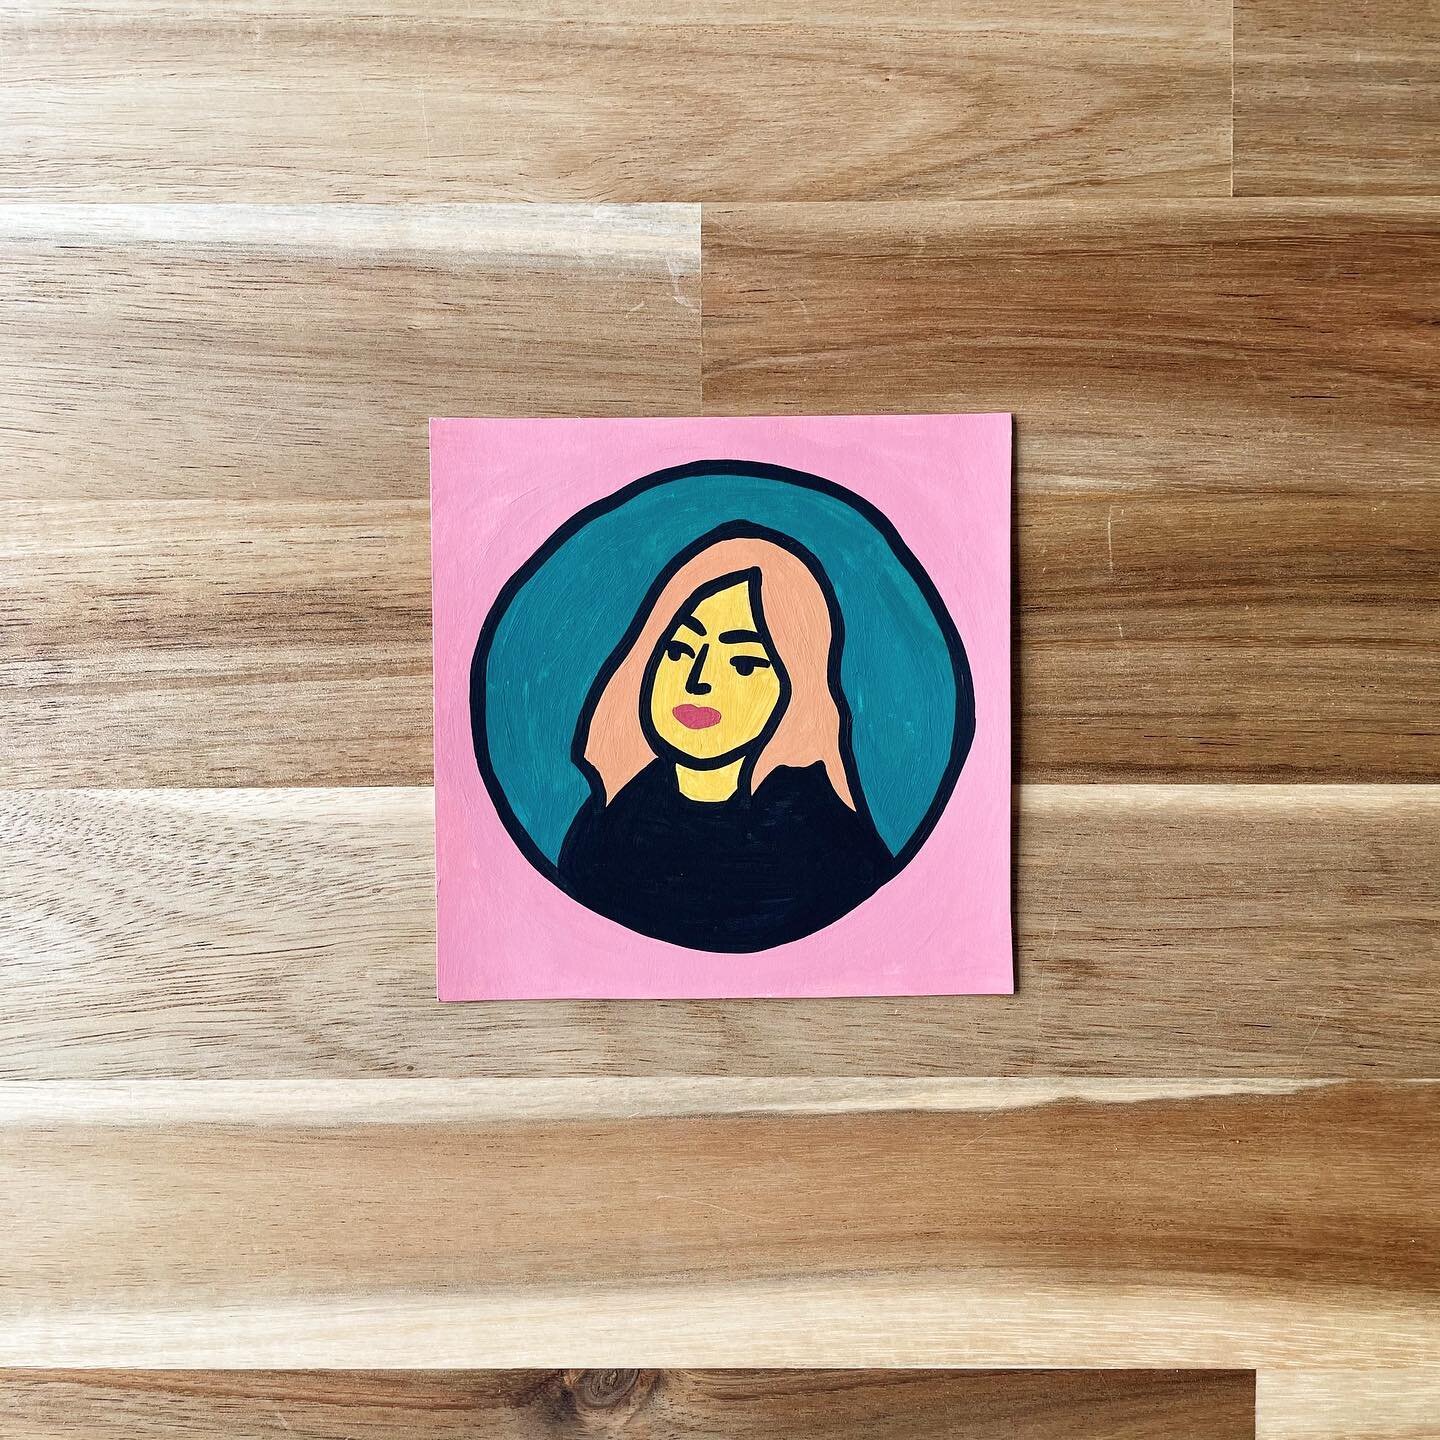 (97/100) Single &ldquo;needy&rdquo; by @mollyjburch🔥 Painted with acrylic on 4&rdquo; x 4&rdquo; paper for my #100albumswithlaura project 🌈

This song feels smooth and confident 🥰

Scroll to see the original 🤍 Comment below what album covers I sh